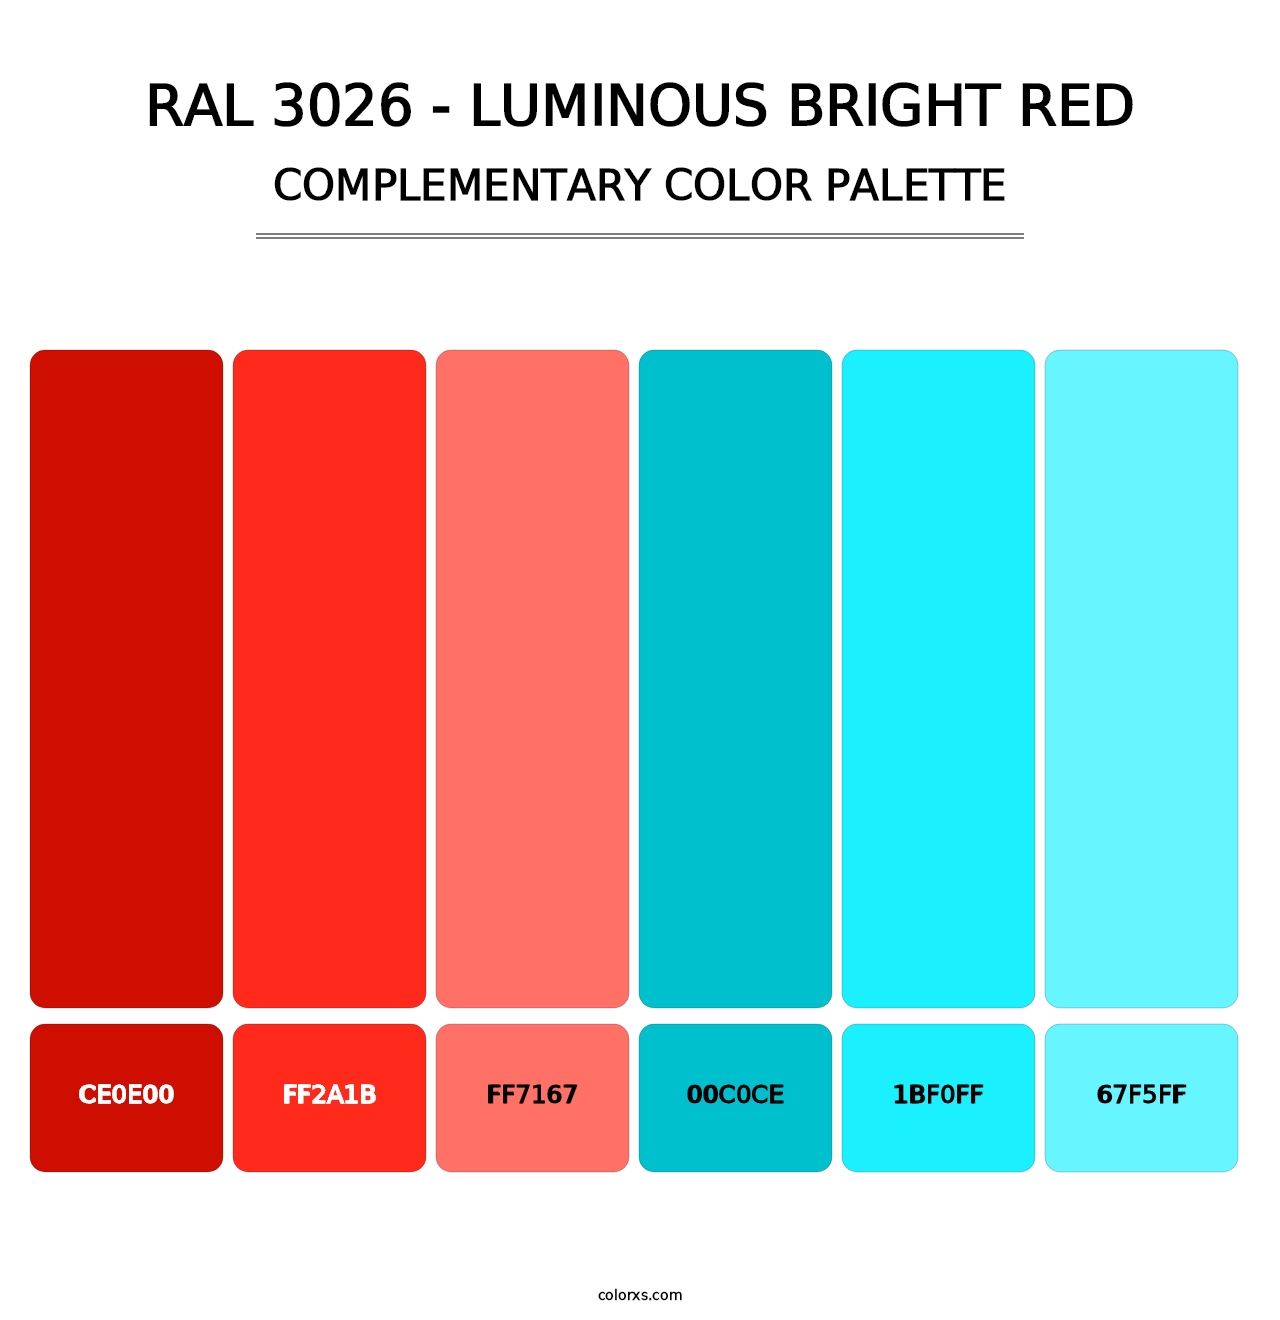 RAL 3026 - Luminous Bright Red - Complementary Color Palette